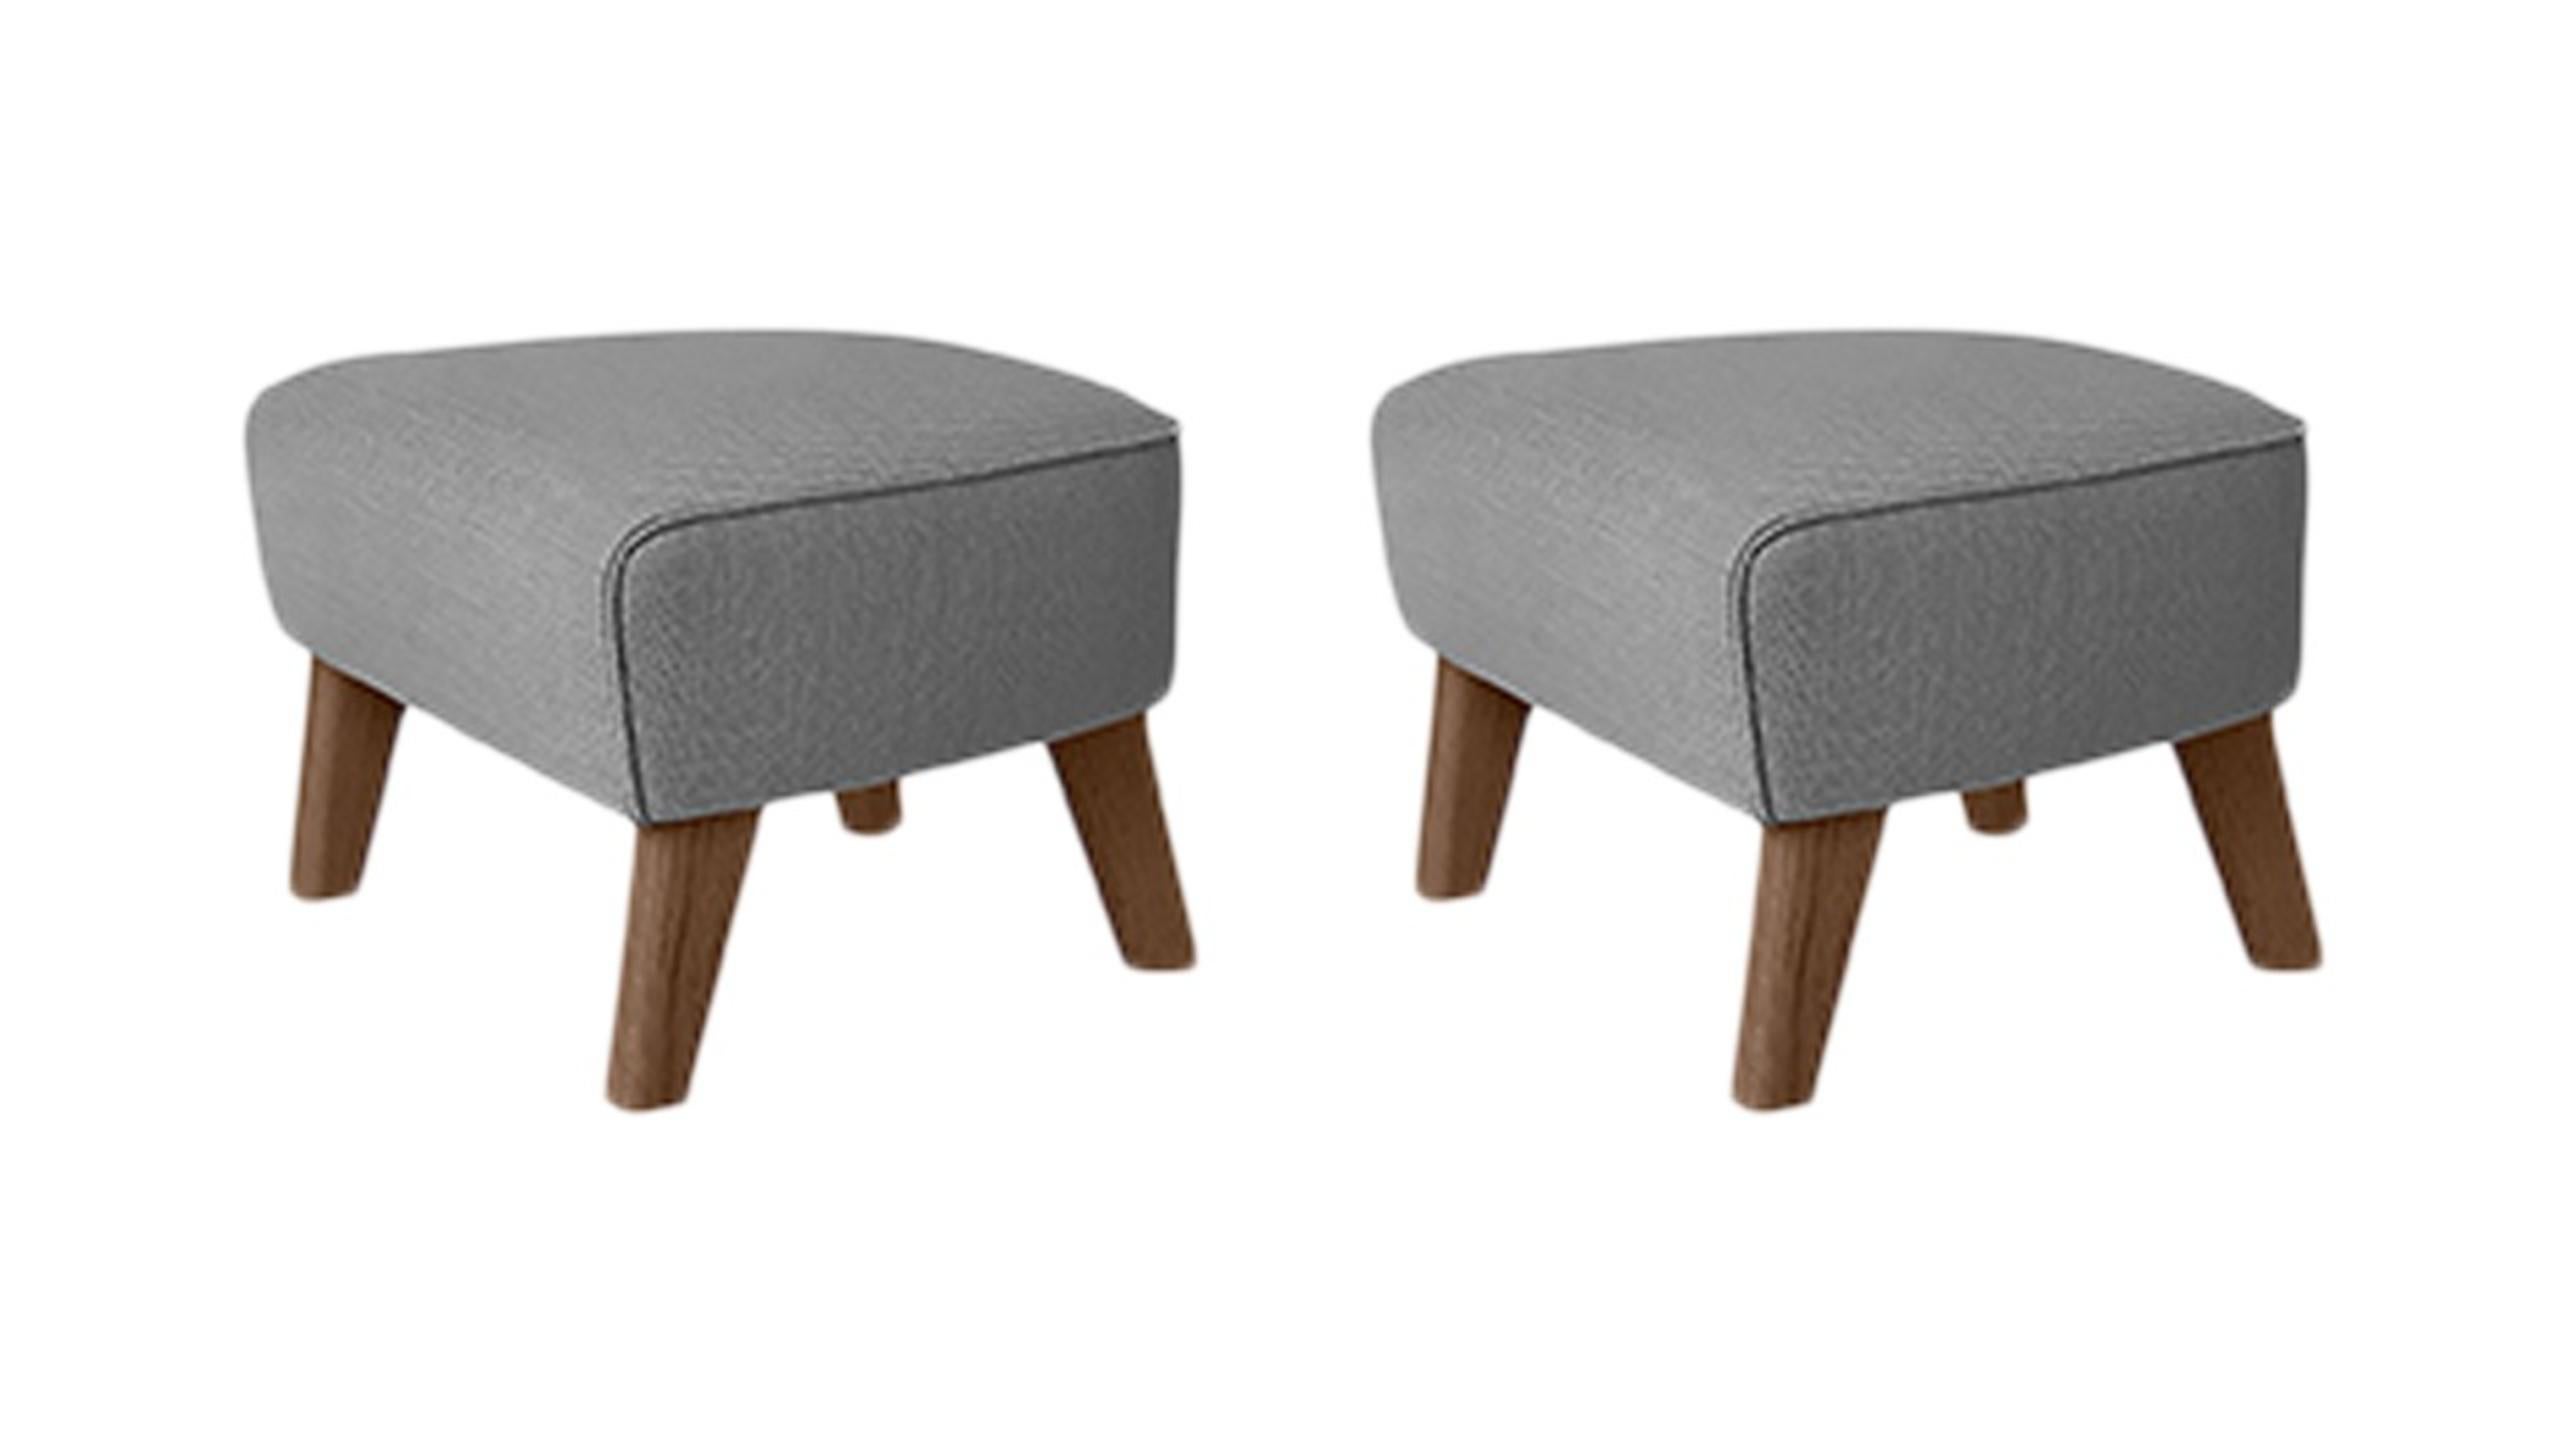 Set of 2 grey and smoked oak Raf Simons Vidar 3 my own chair footstool by Lassen
Dimensions: W 56 x D 58 x H 40 cm 
Materials: Textile
Also available: Other colors available,

The my own chair footstool has been designed in the same spirit as